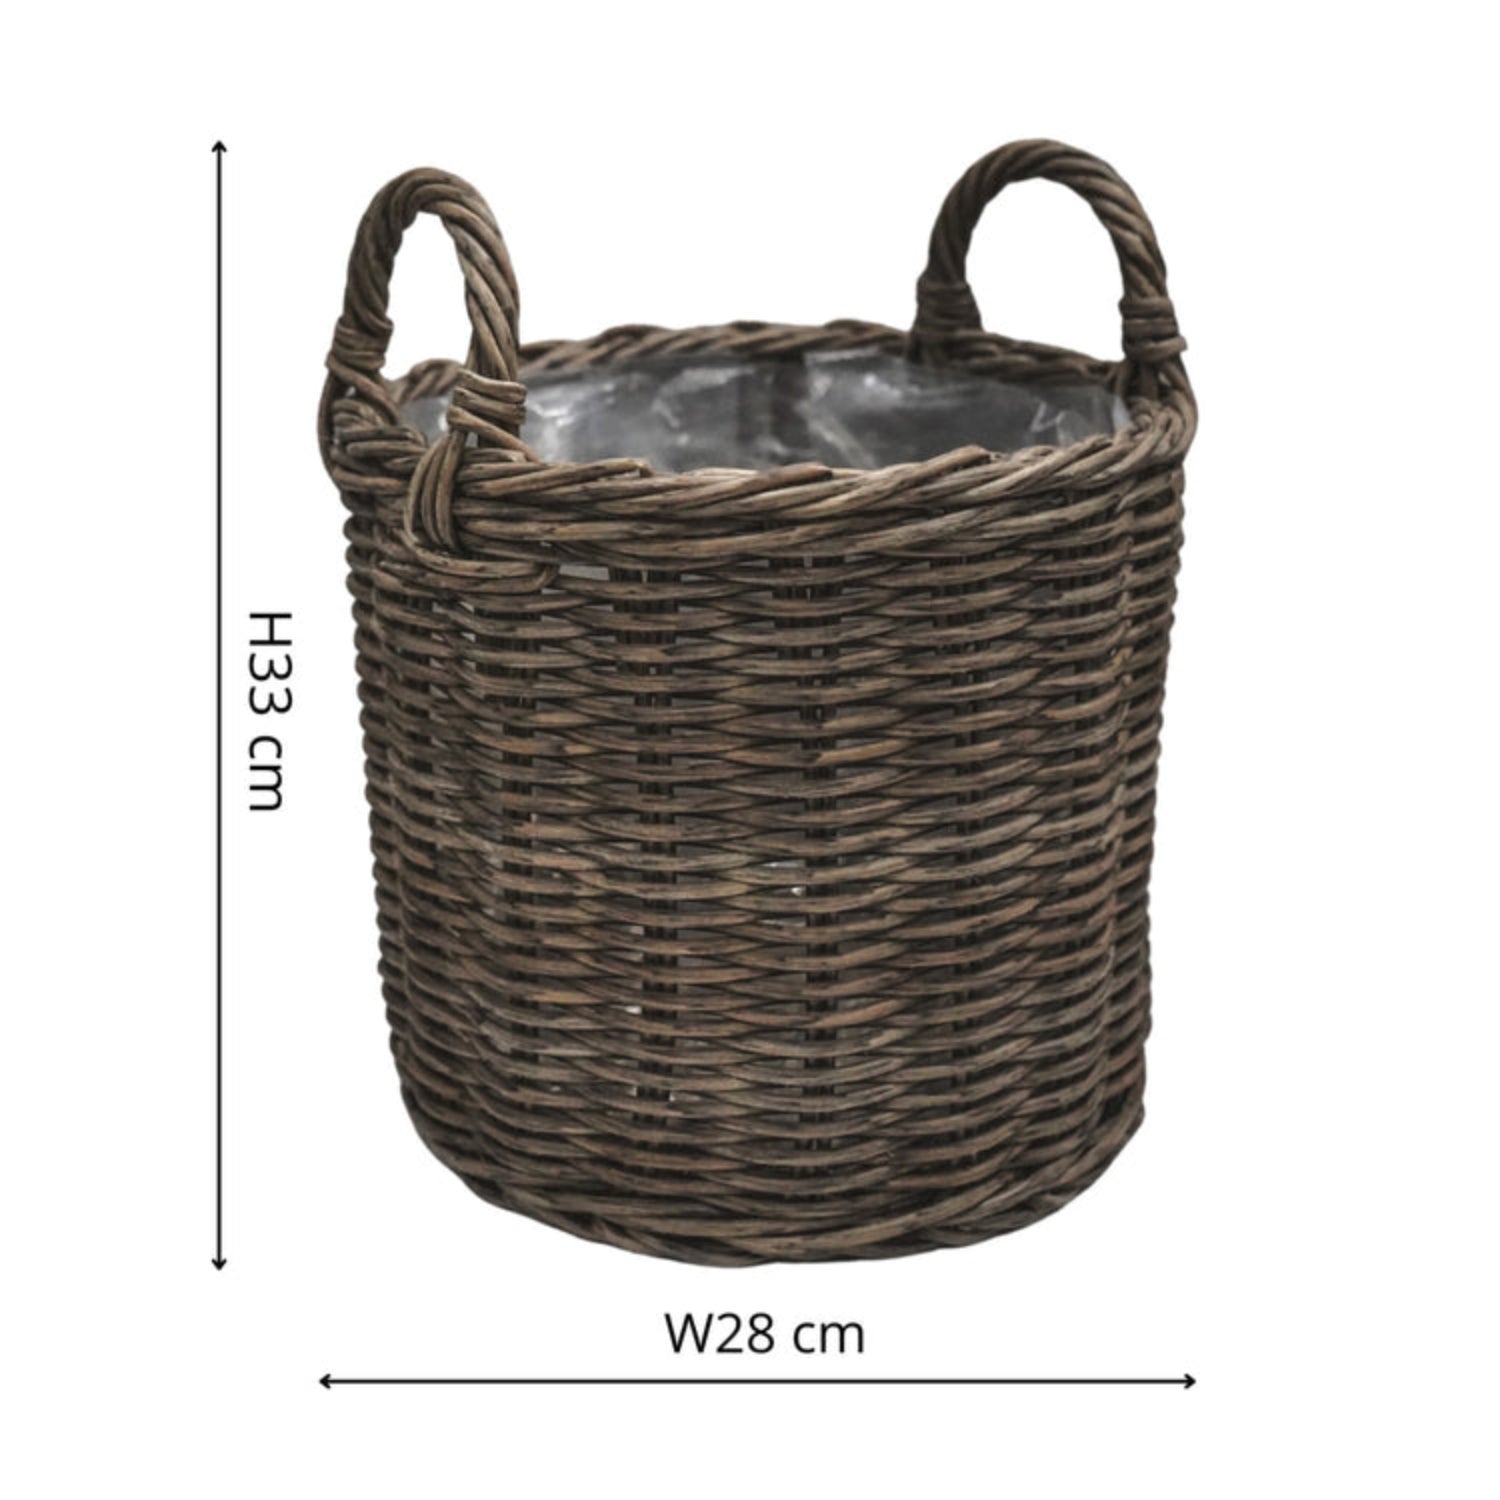 Set of 2 Polyrattan Lined Planters